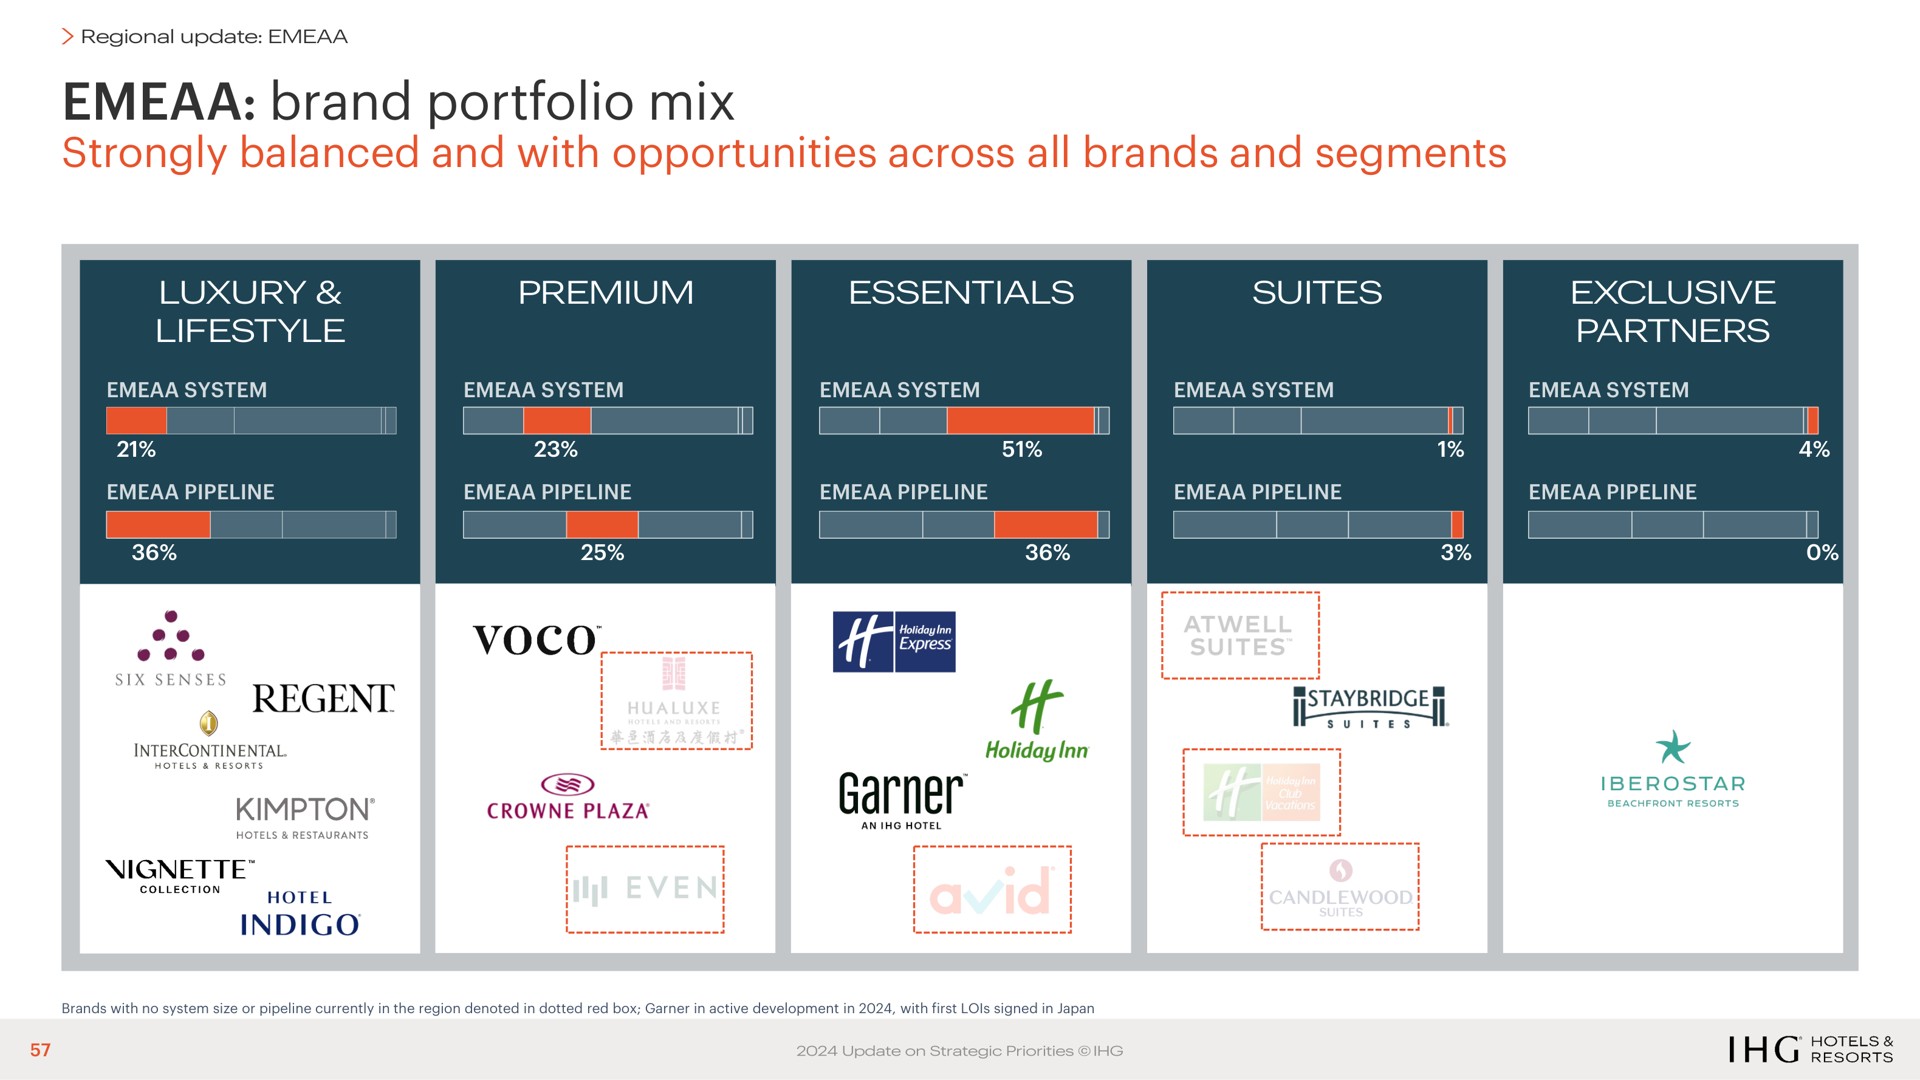 brand portfolio mix strongly balanced and with opportunities across all brands and segments | IHG Hotels